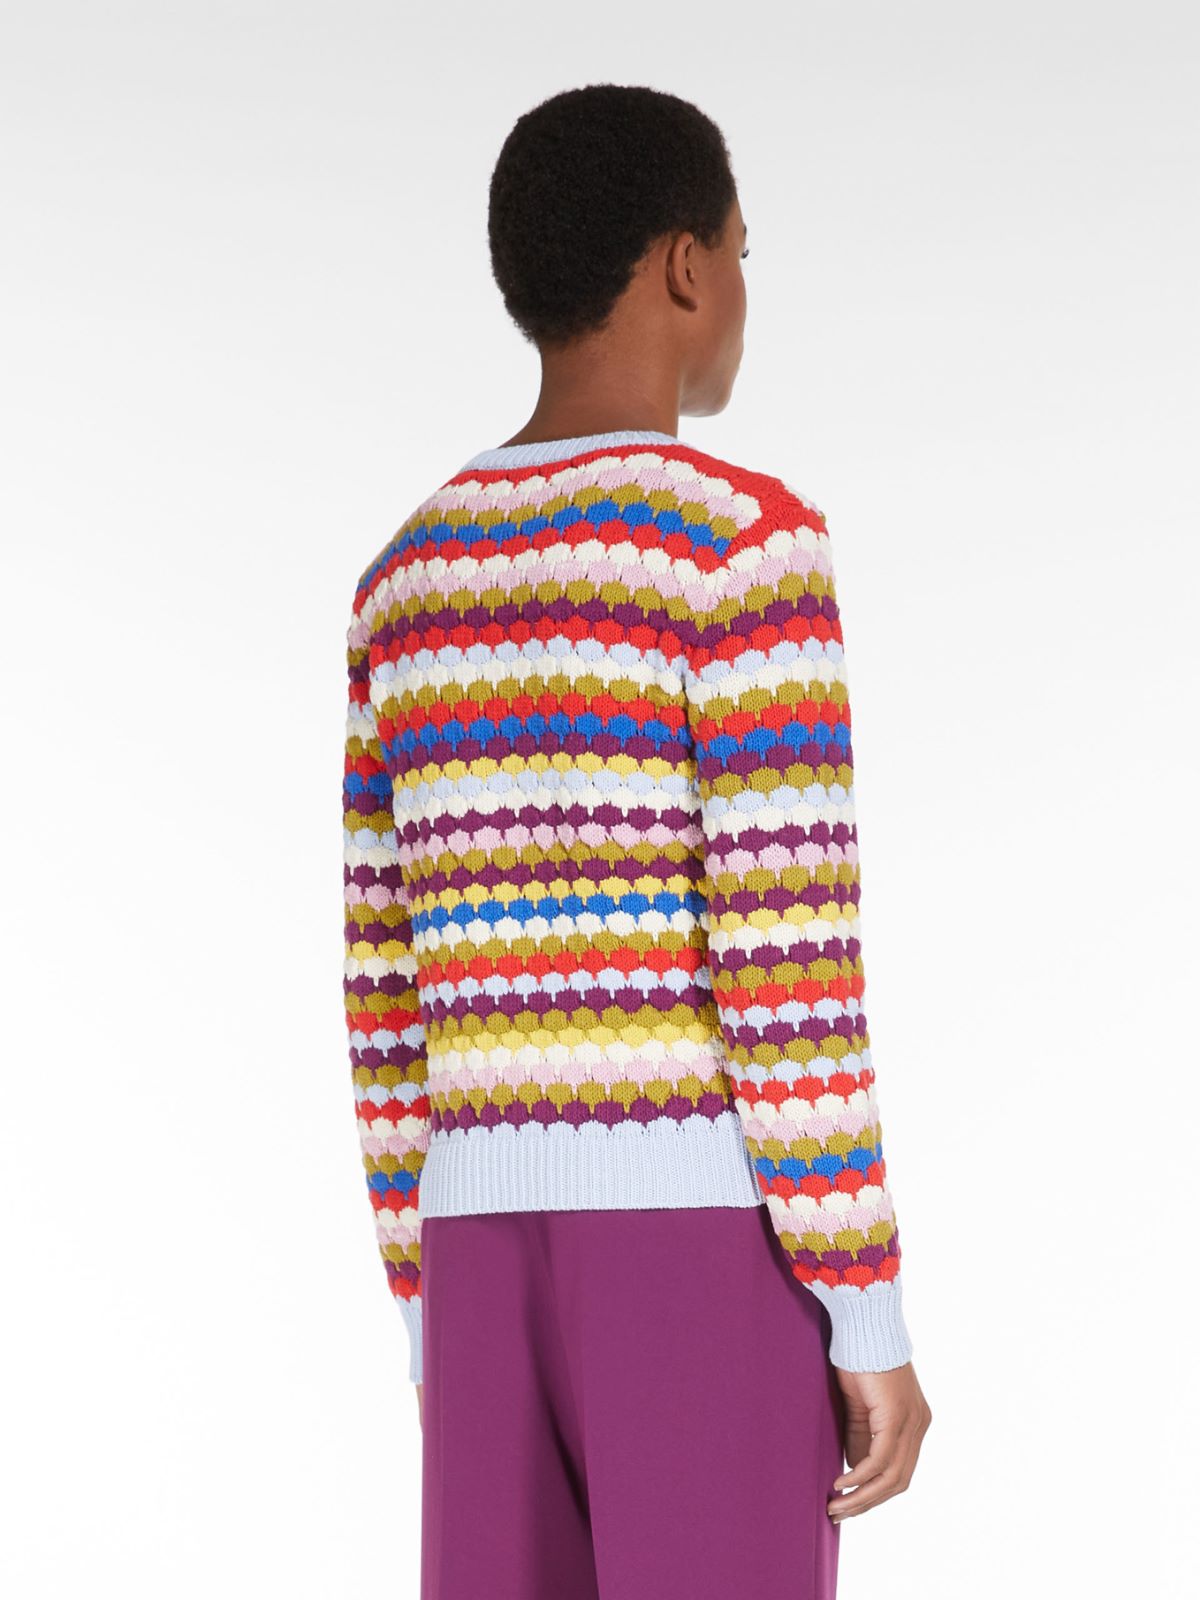 Round-neck knit top in striped cotton - MULTICOLOUR - Weekend Max Mara - 3